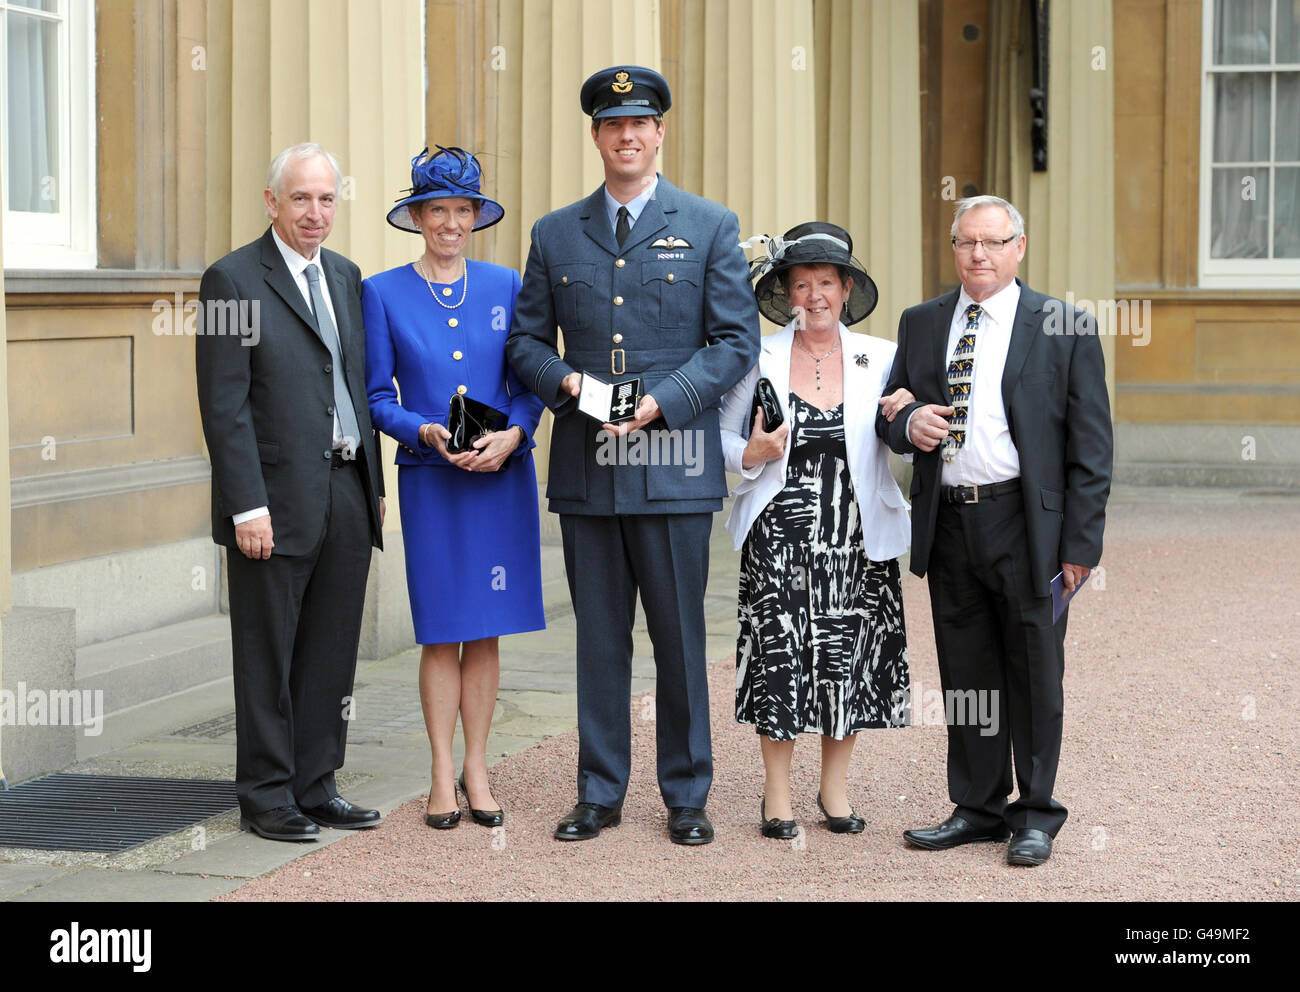 Flight Lieutenant Ian Fortune poses with family members (names not given) in the Quadrangle of Buckingham Palace, London after being presented with The Distinguished Flying Cross by the Prince of Wales. Stock Photo